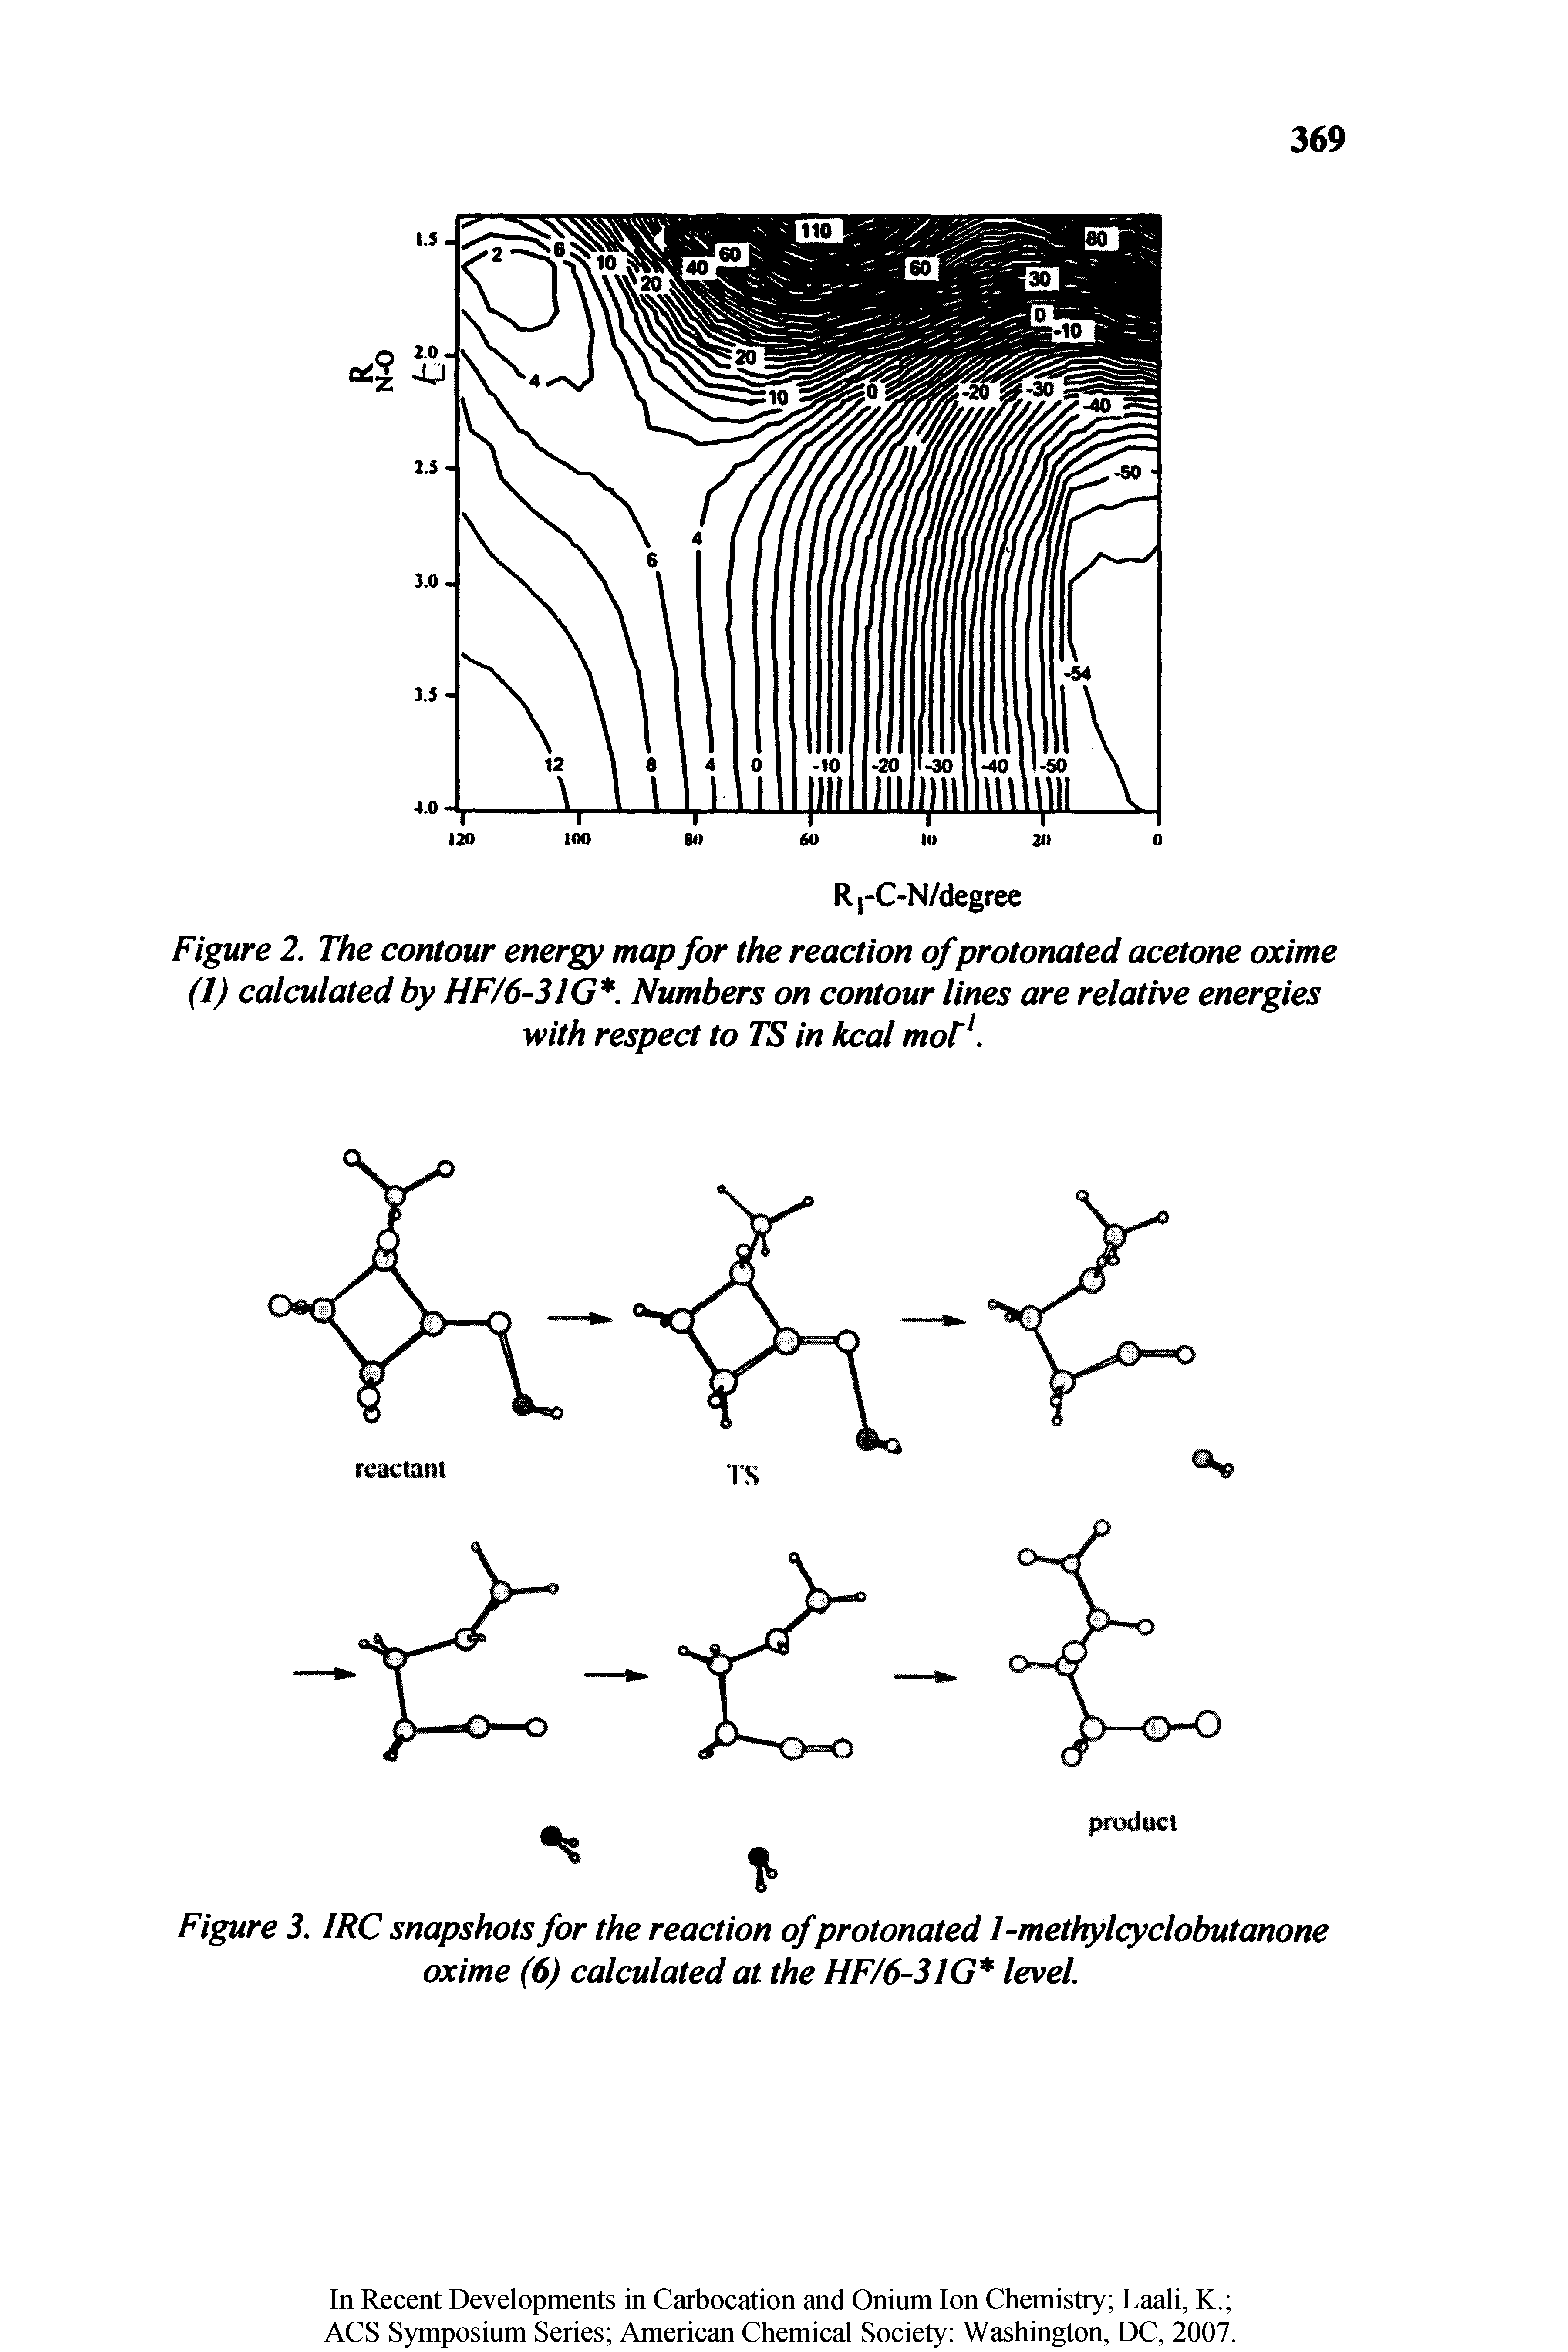 Figure 2. The contour energy map for the reaction ofprotonated acetone oxime (1) calculated by HF/6-31G. Numbers on contour lines are relative energies with respect to TS in kcal mot1.